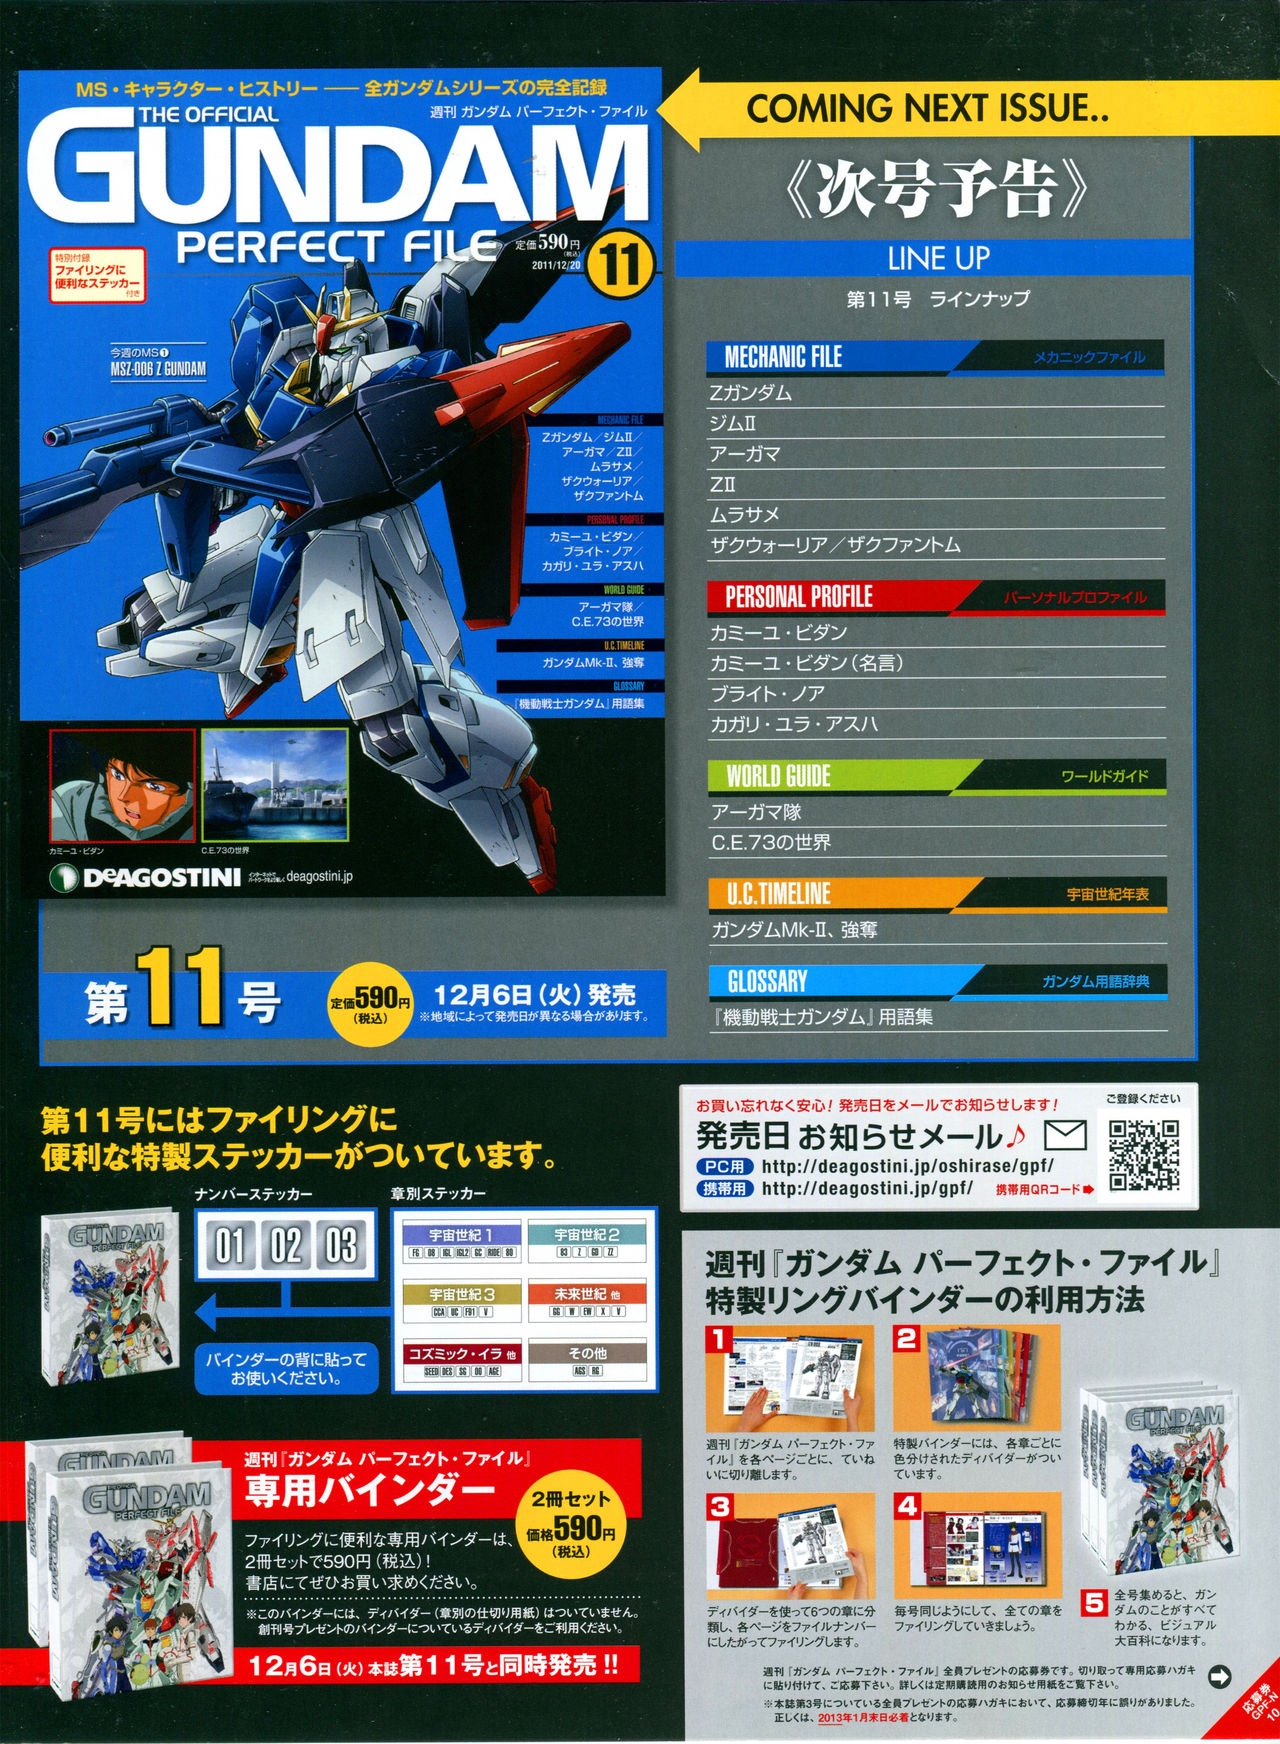 The Official Gundam Perfect File - No. 010 40